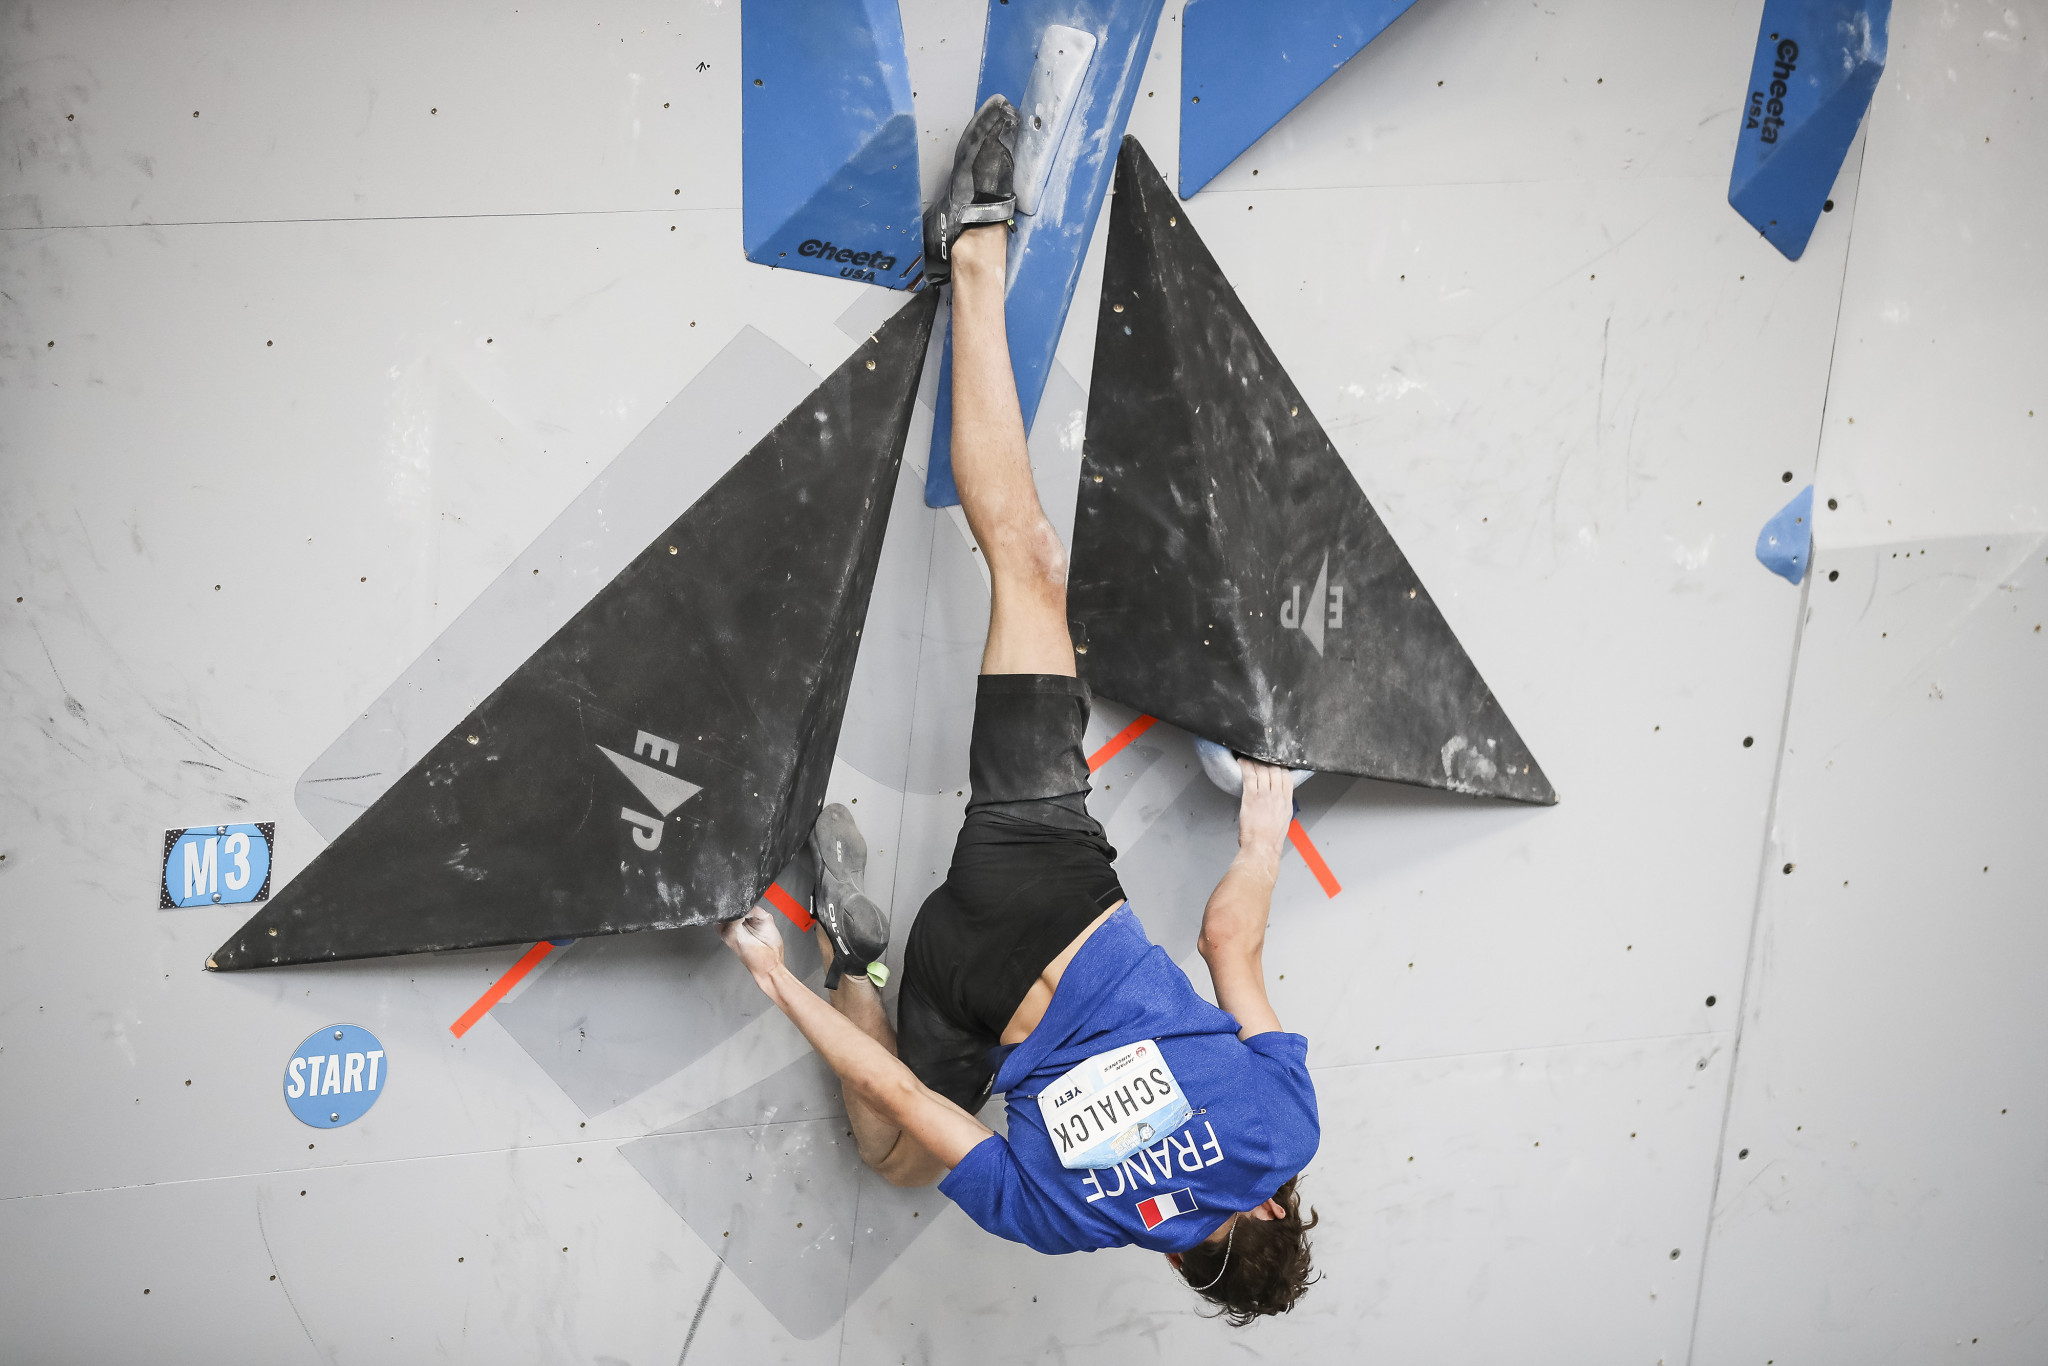 Mejdi Schalck placed 13th overall in the boulder tournament at the 2021 Climbing World Cup event in Briançon in France ©Getty Images